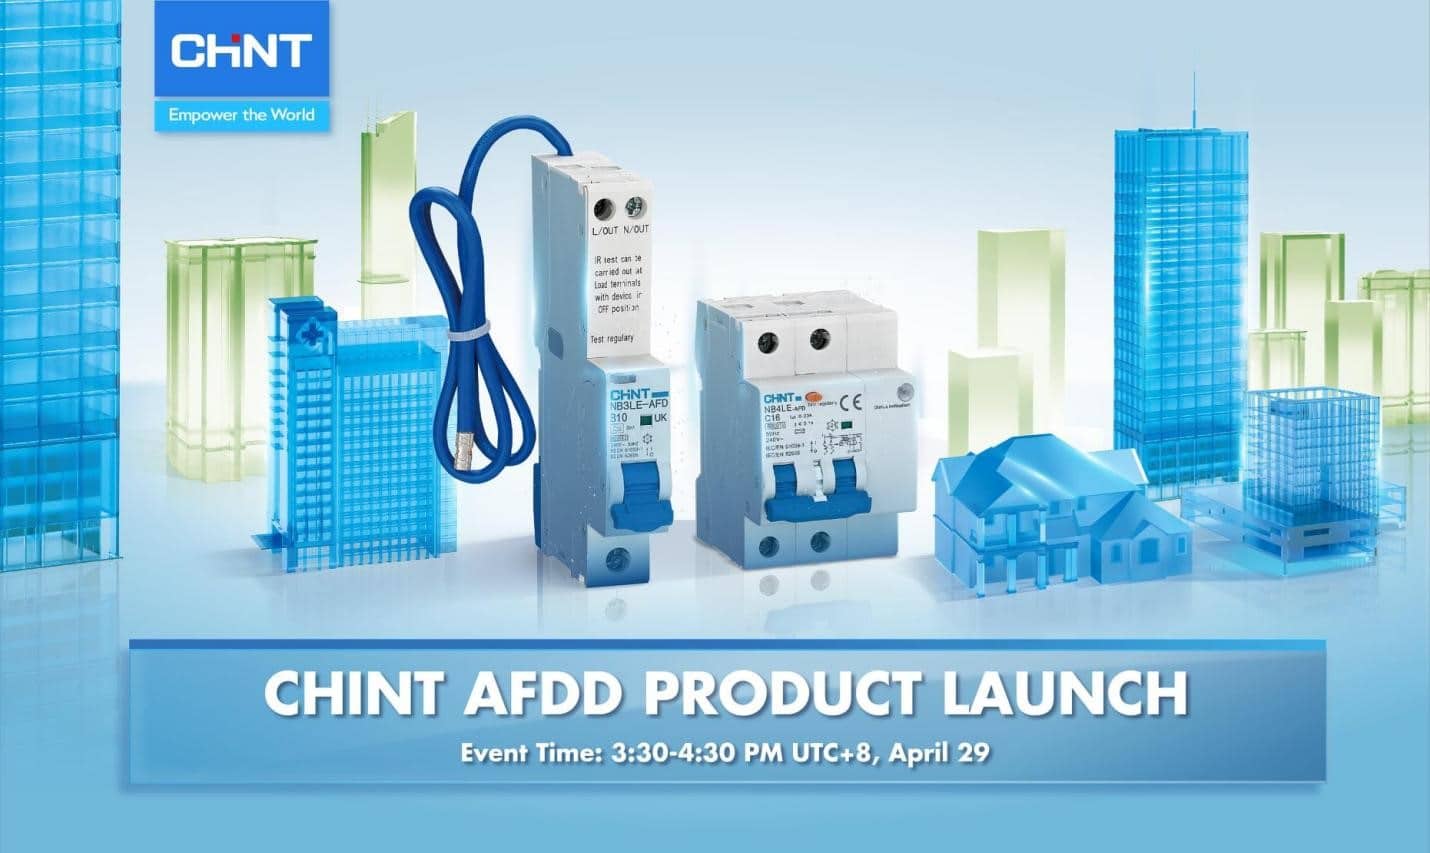 CHINT Arc Fault Detection Devices Products